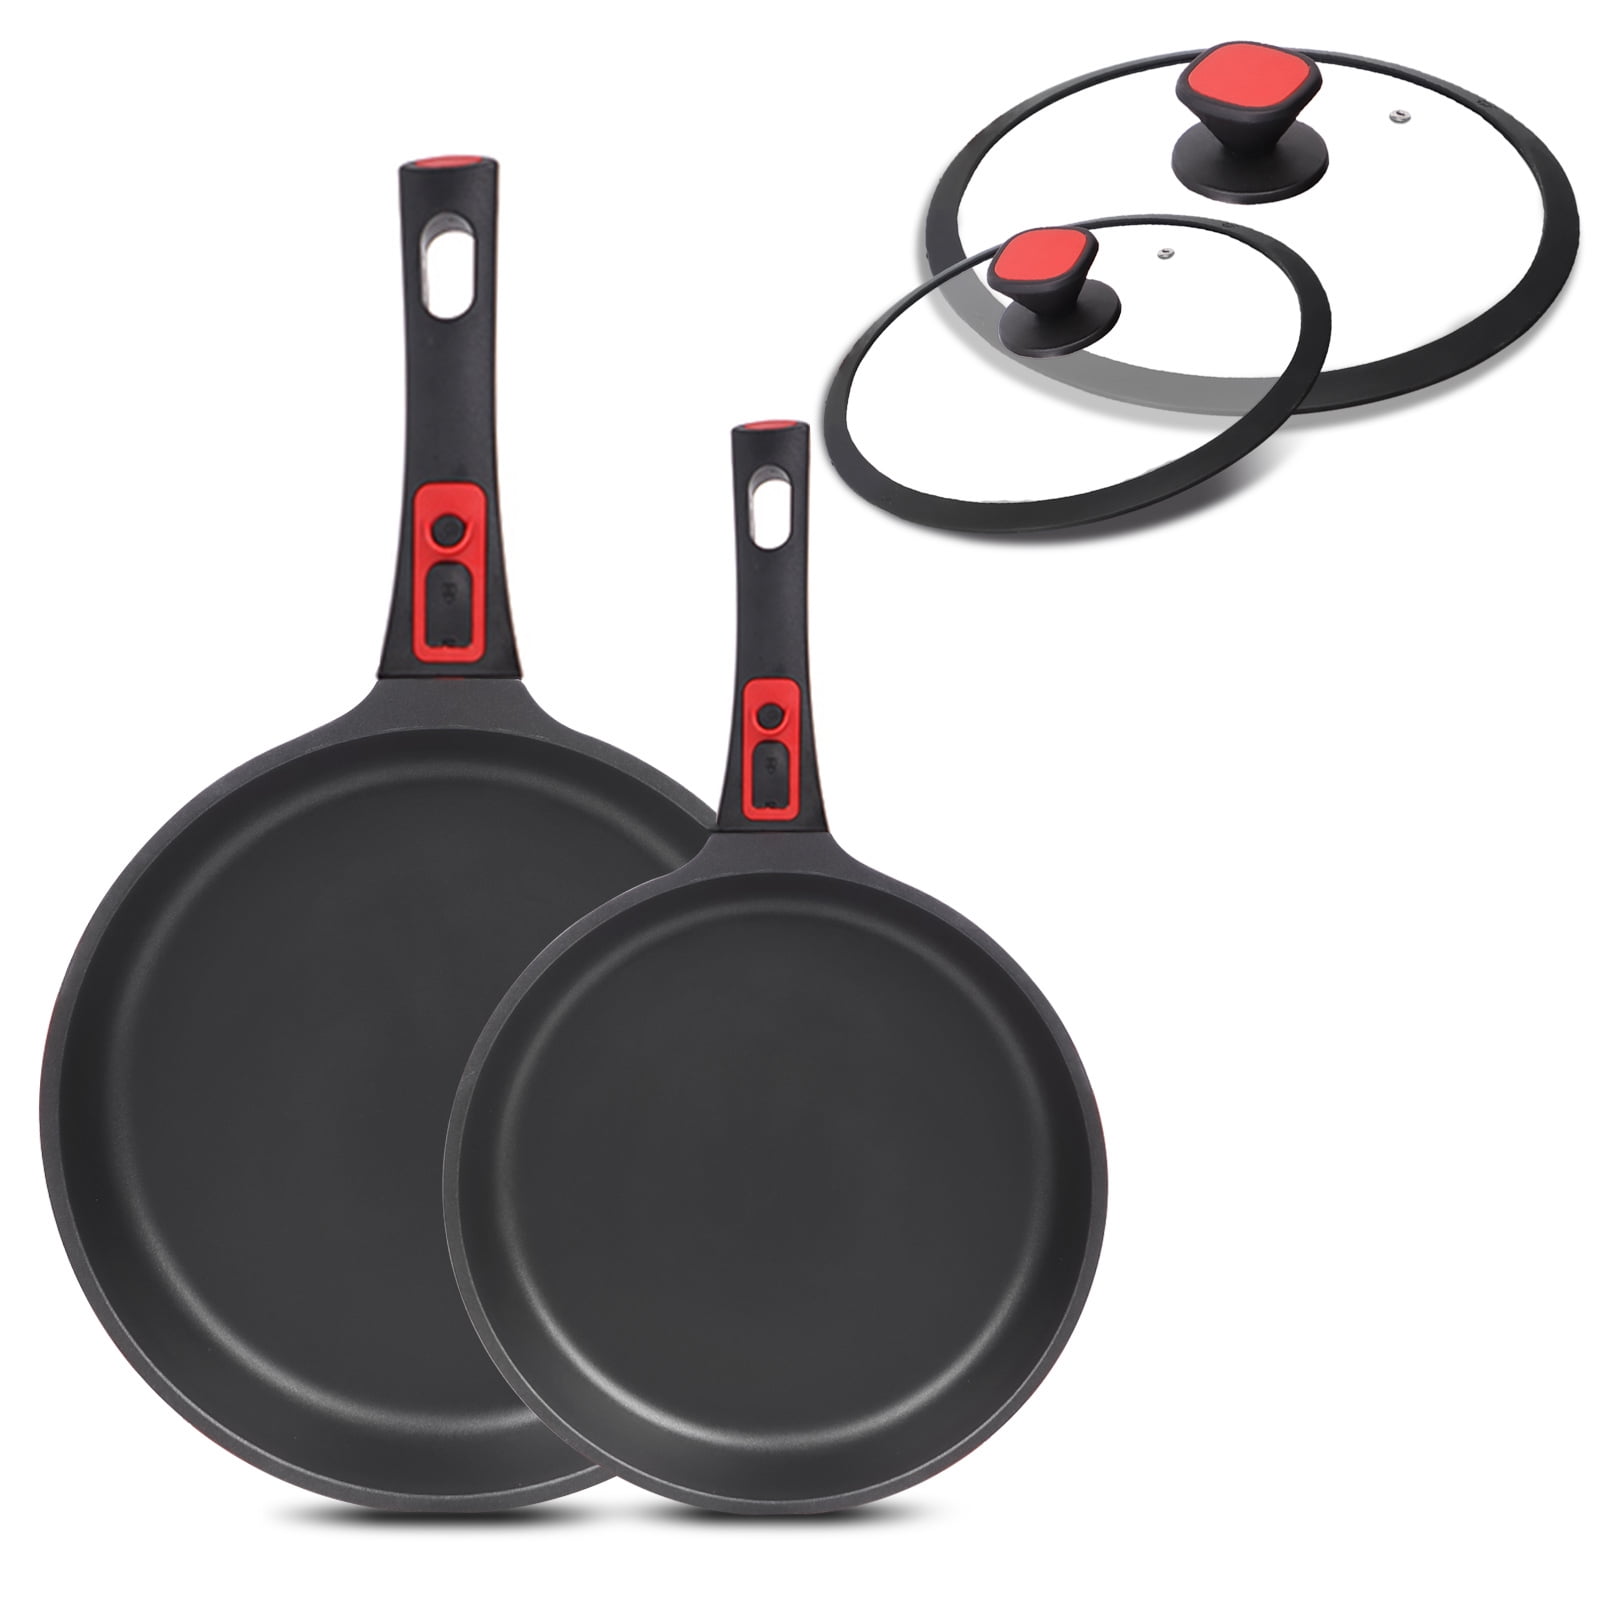 11 inch Nonstick Sauté Pan with Rubber Lid, DIIG Frying Pan